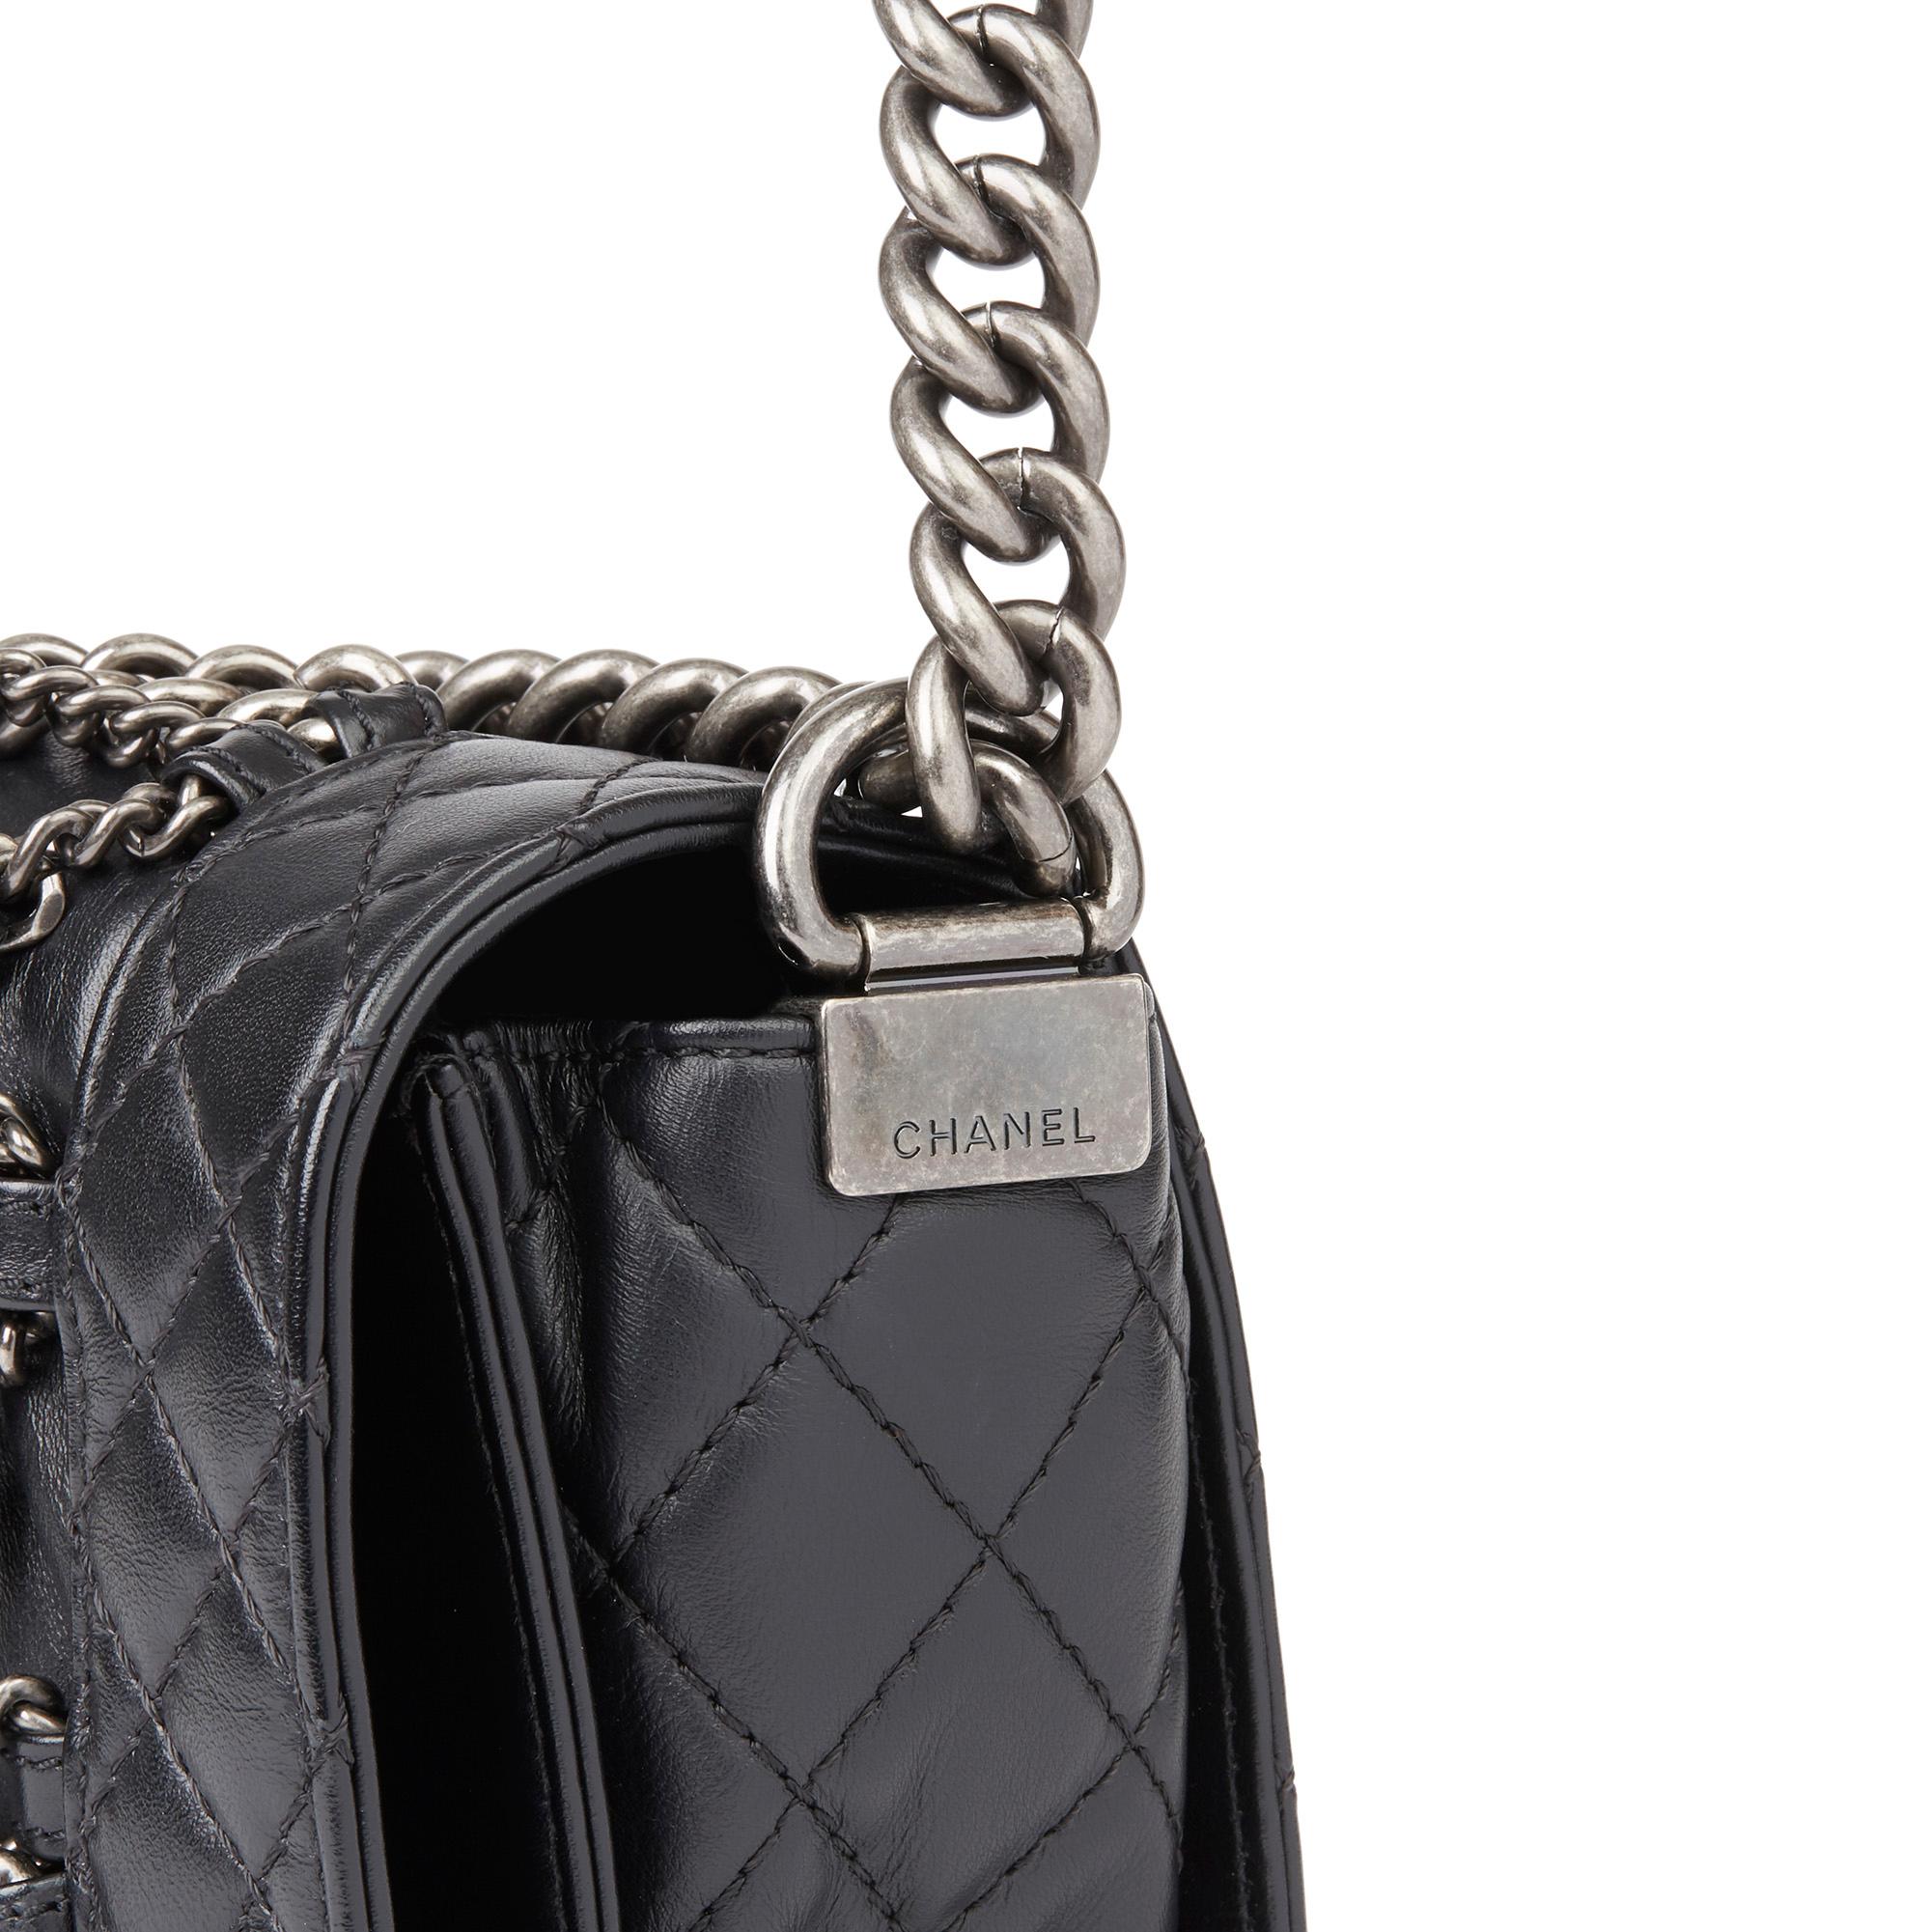 2014 Chanel Black Quilted Calfskin Leather Enchained Medium Le Boy Reverso 1